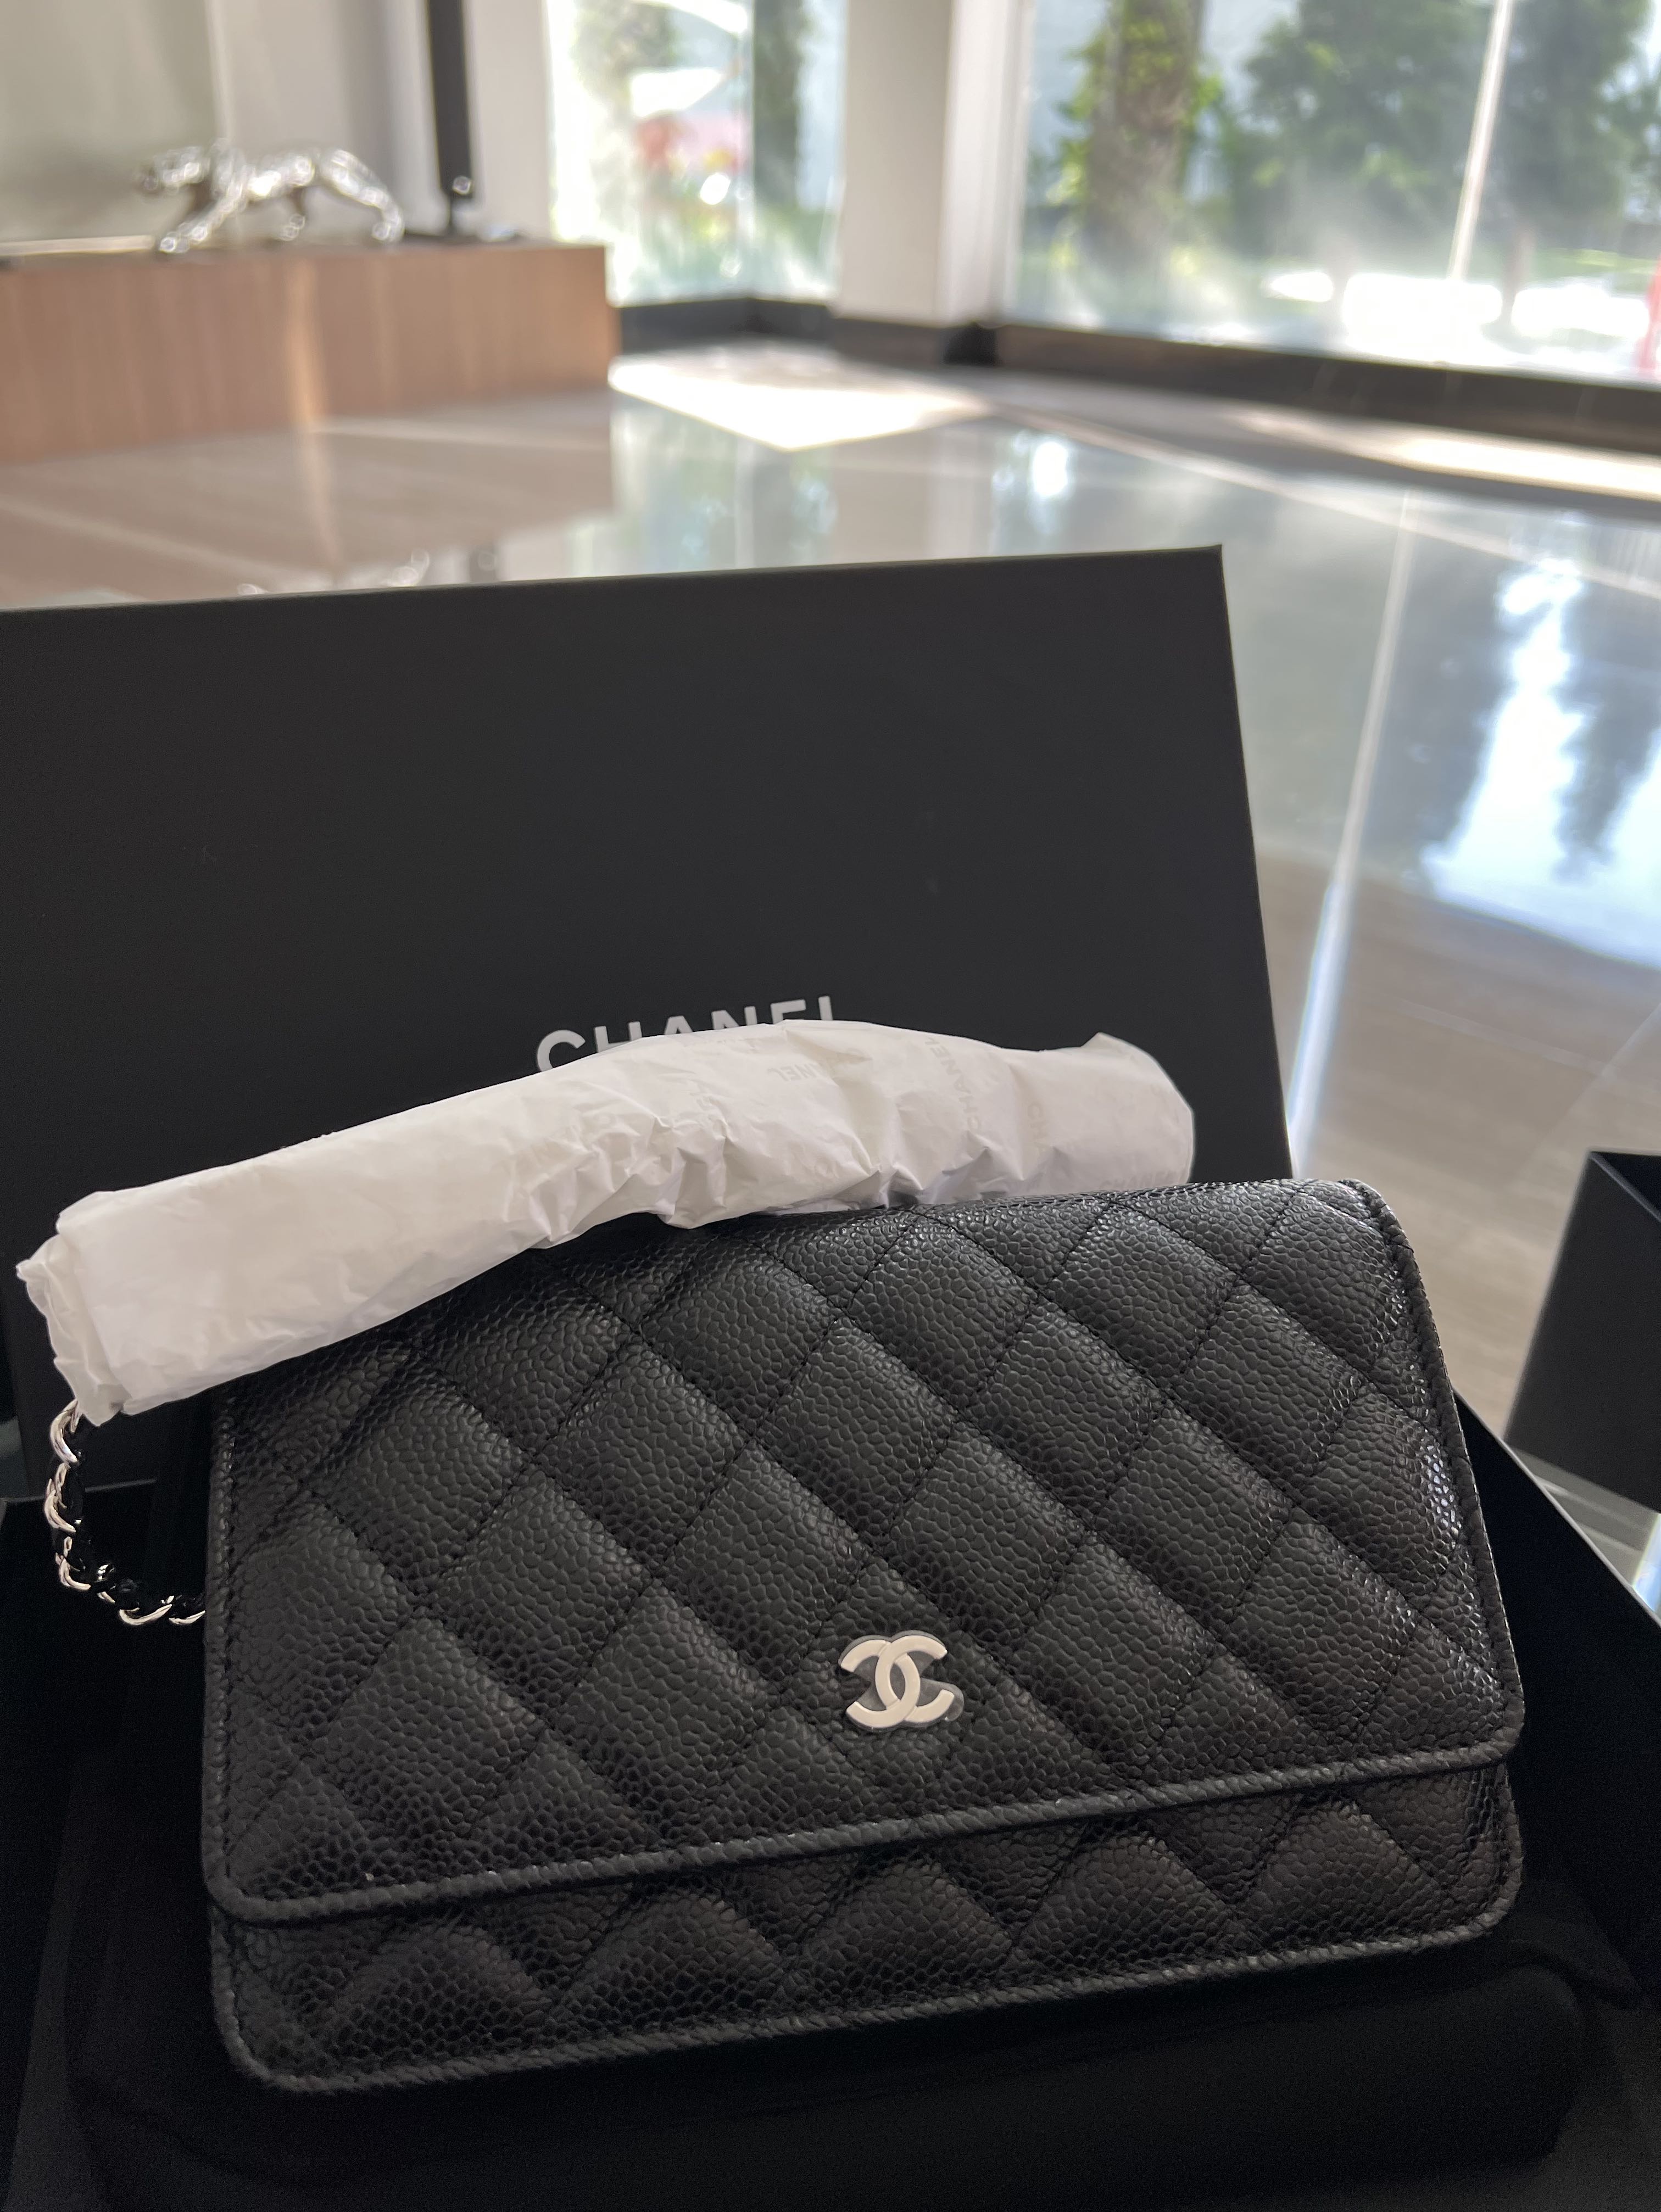 Woc chanel Review: Chanel